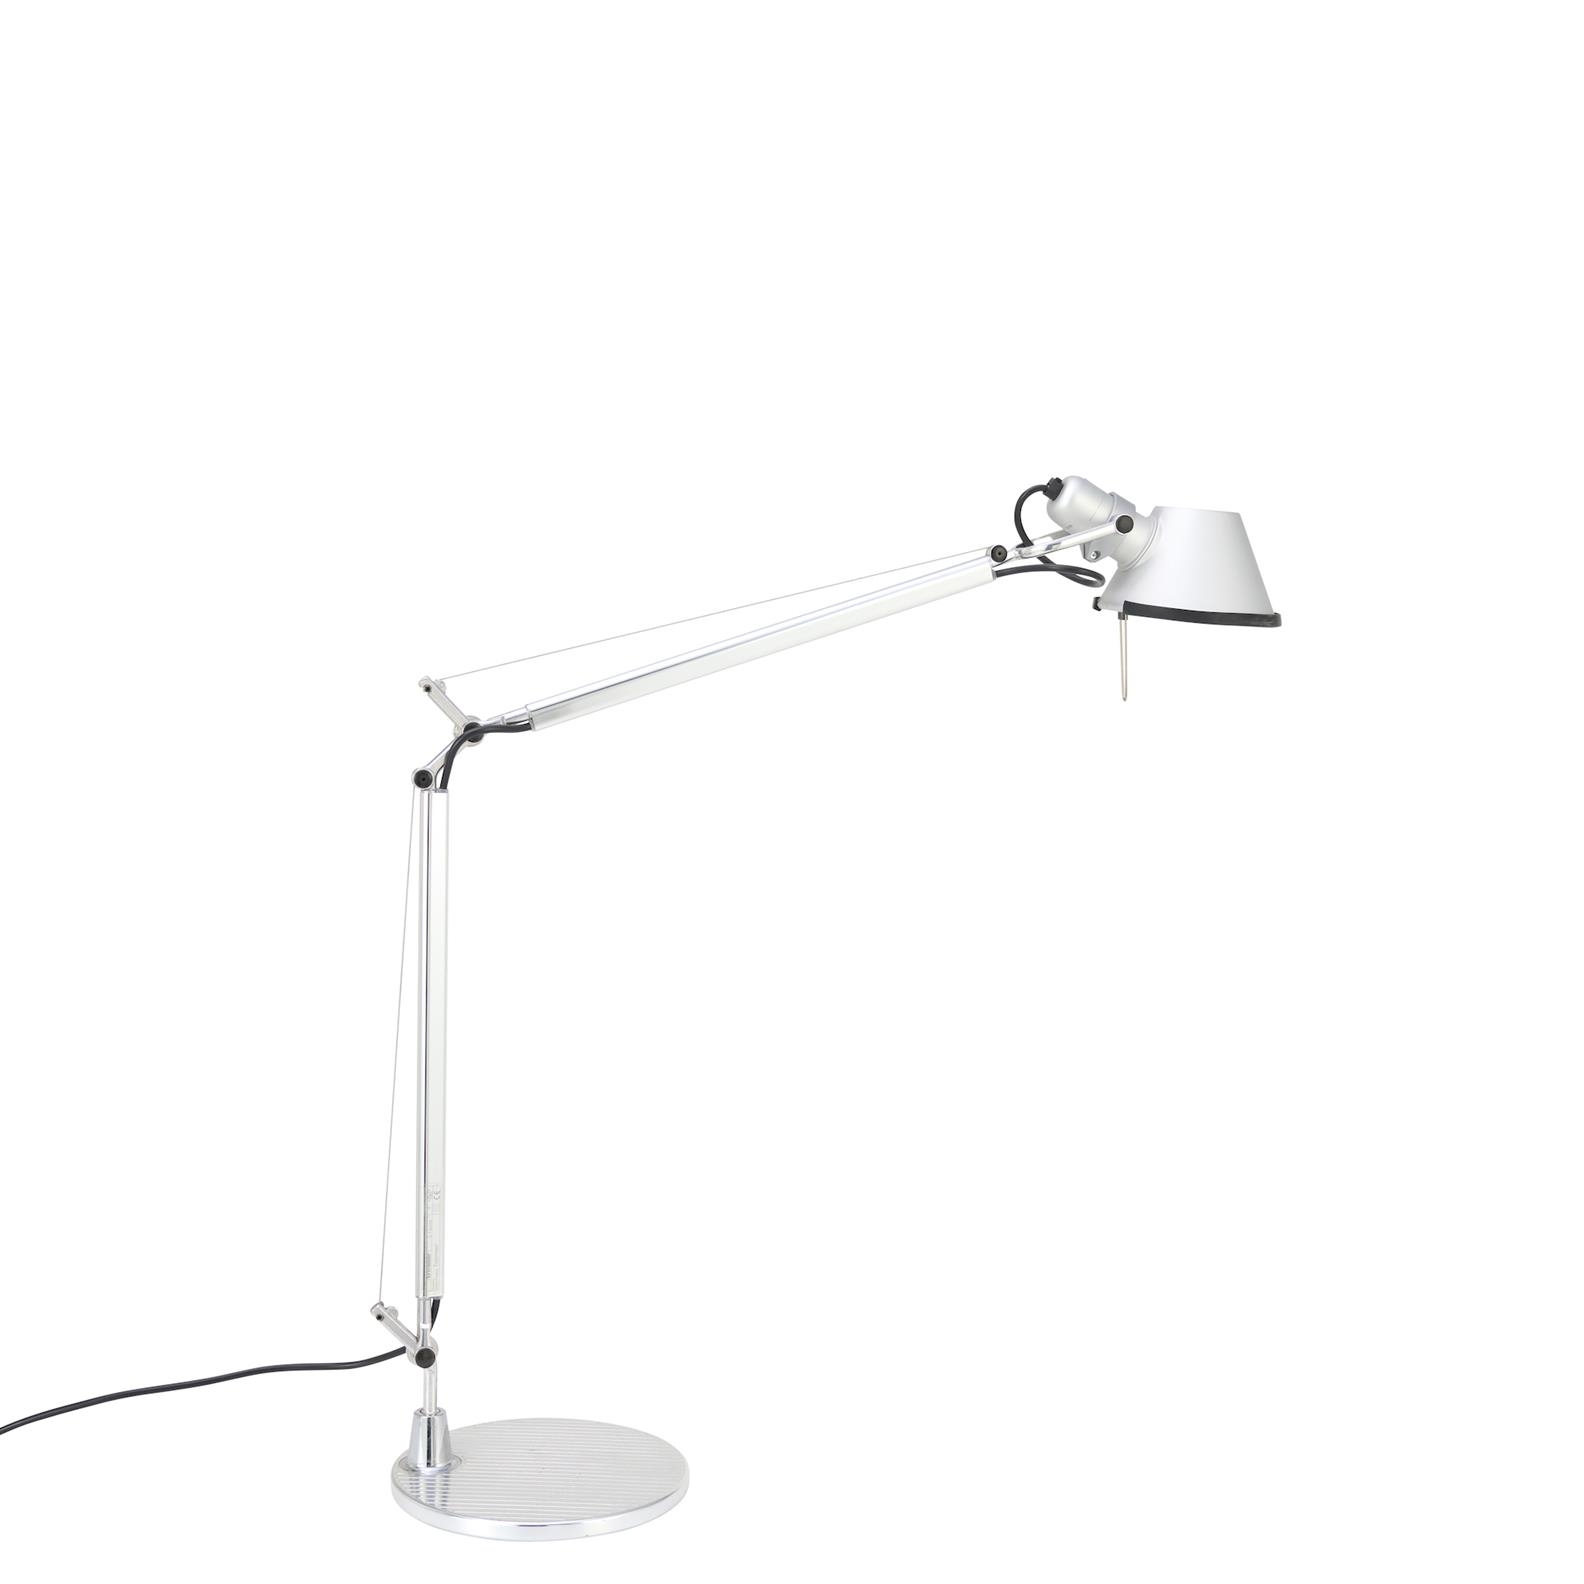 MICHELE DE LUCCHI & GIANCARLO FASSINA A PAIR OF TOLOMEO LAMPS FOR ARTEMIDE - Giancarlo Fassina